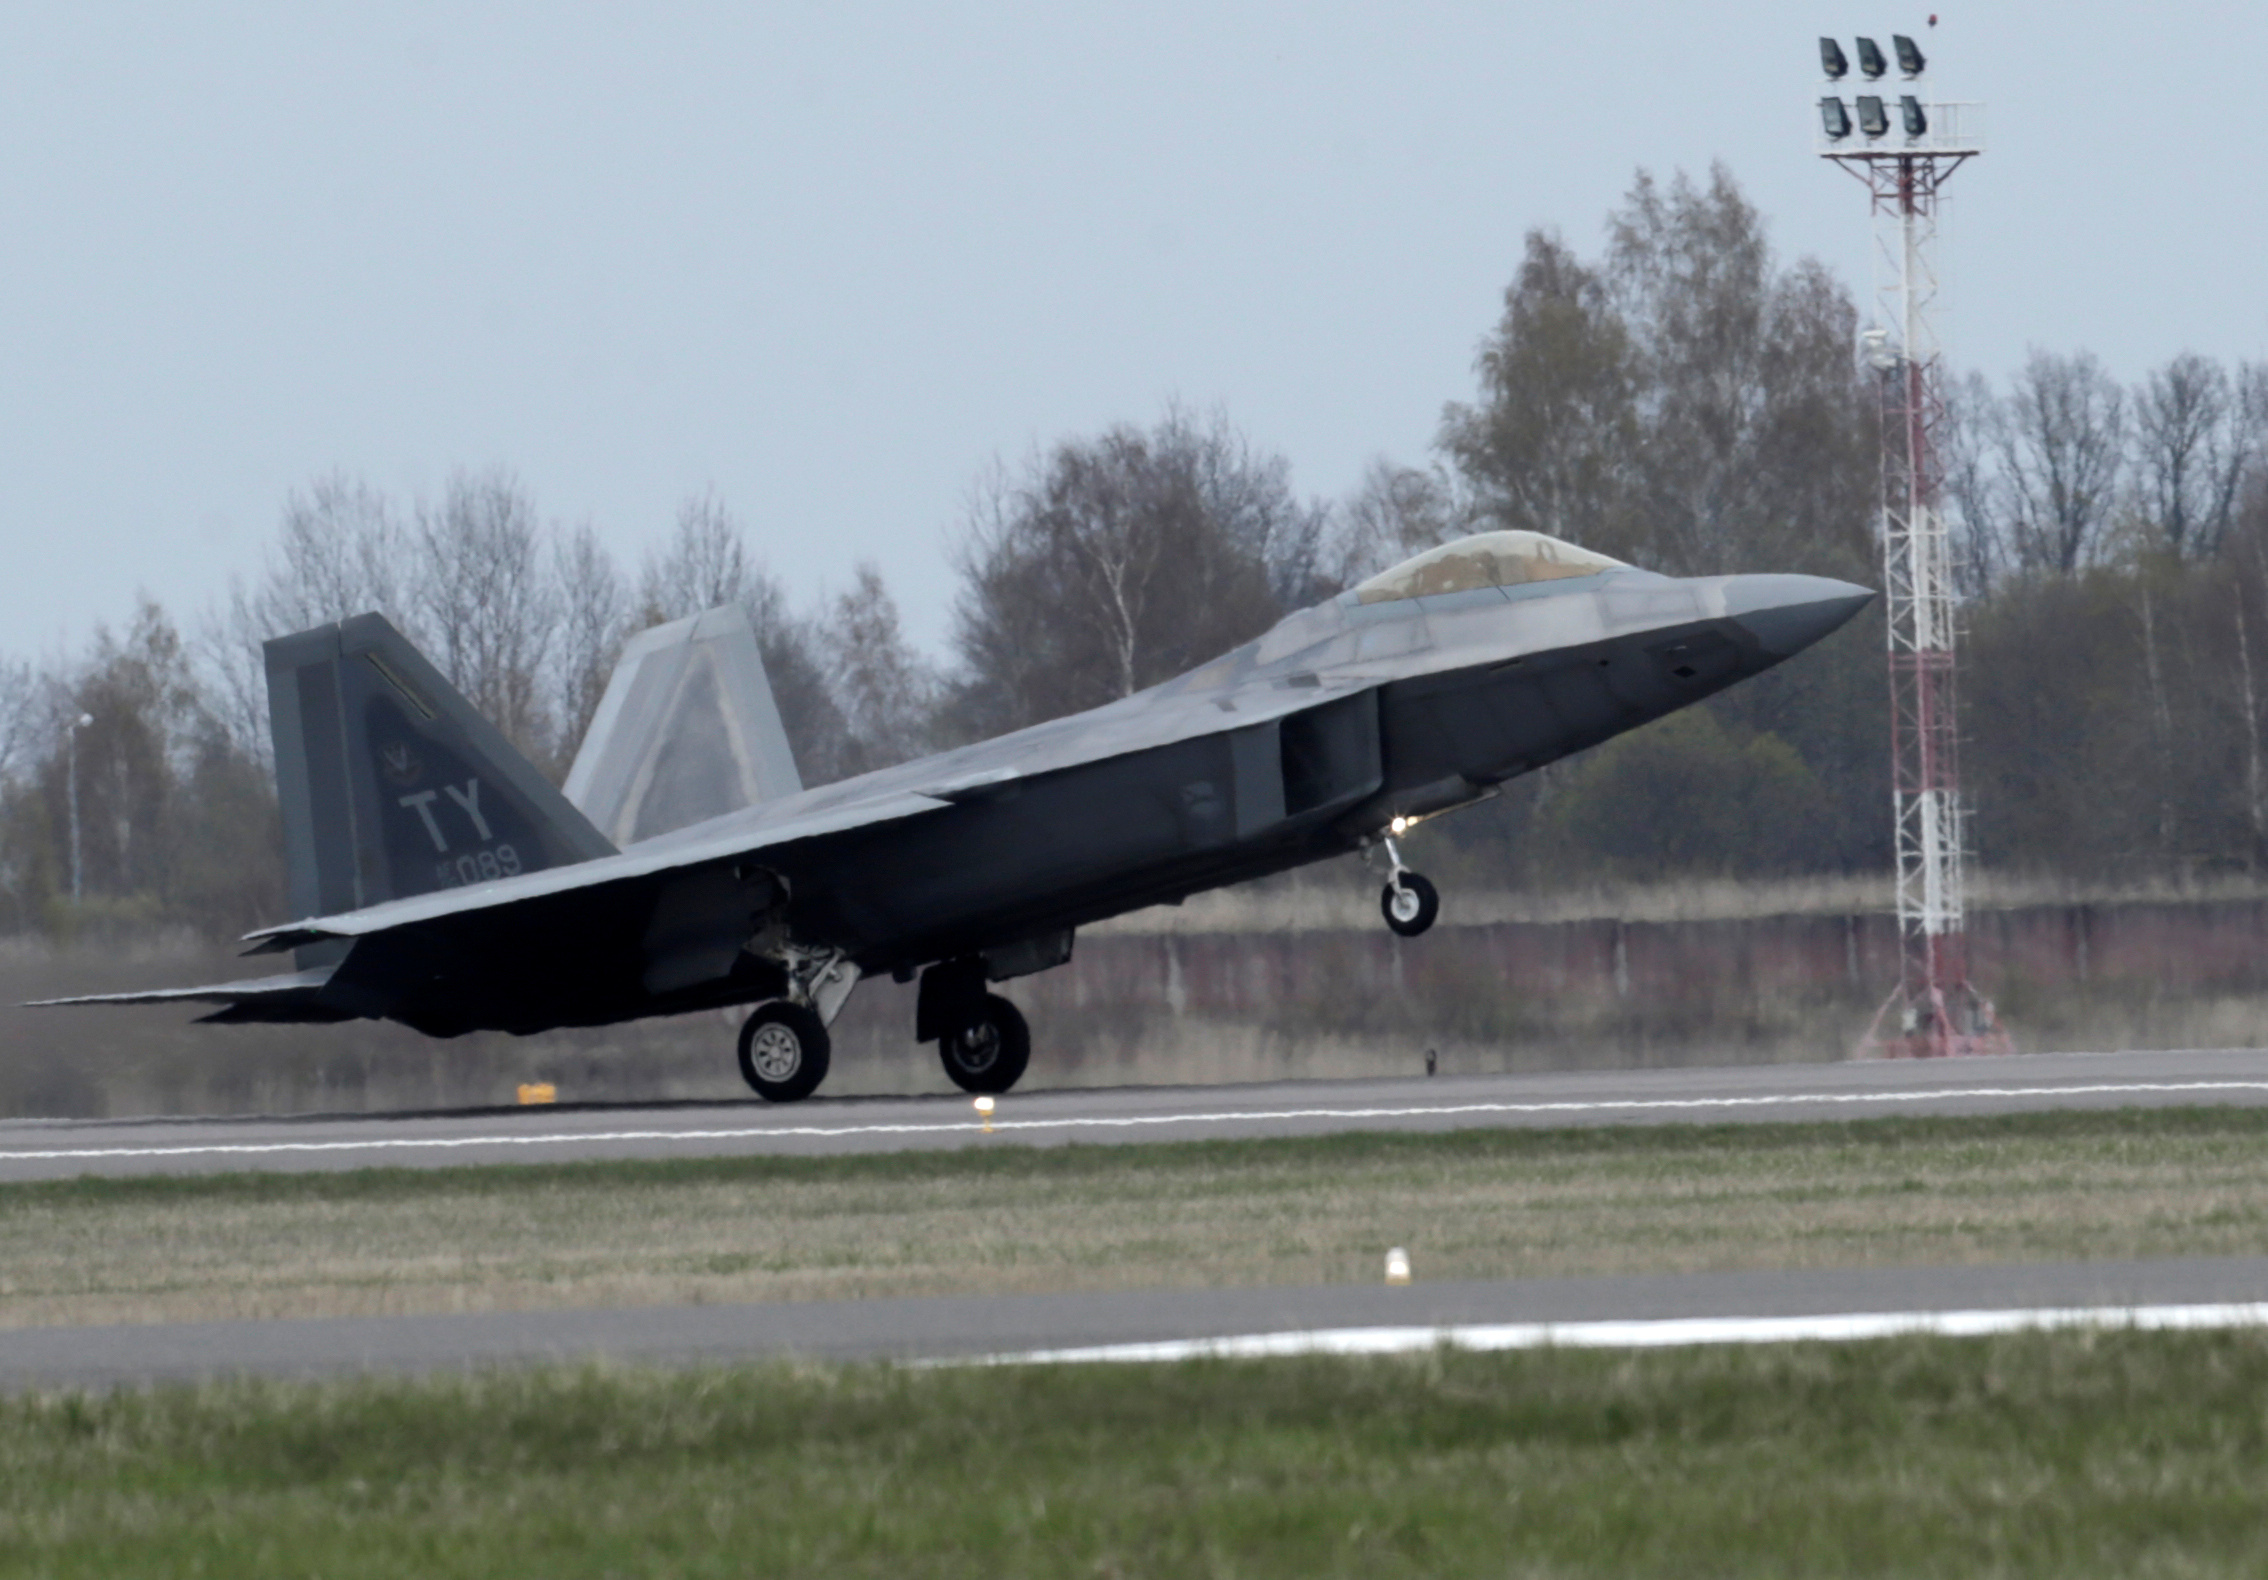 U.S. Air Force F-22 Raptor fighter lands in the military air base in Siauliai, Lithuania, April 27, 2016. REUTERS/Ints Kalnins/File Photo